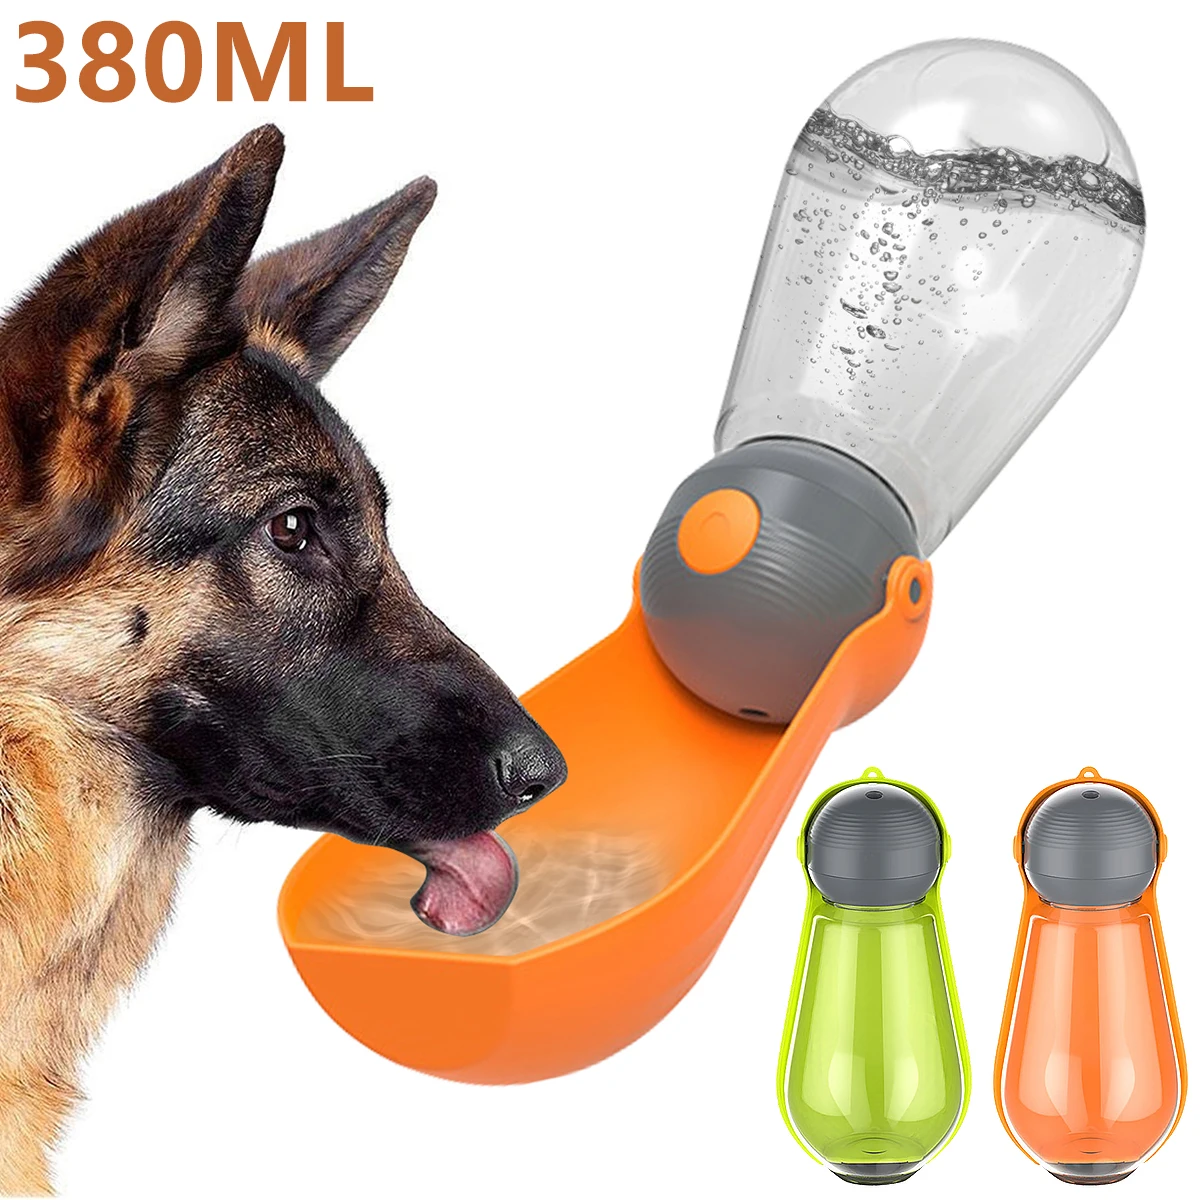 

380ml Portable Pet Water Bottle Foldable Dog Water Dispenser with Leak-proof Pets Drink Cup for Outdoor Walking Travel Use